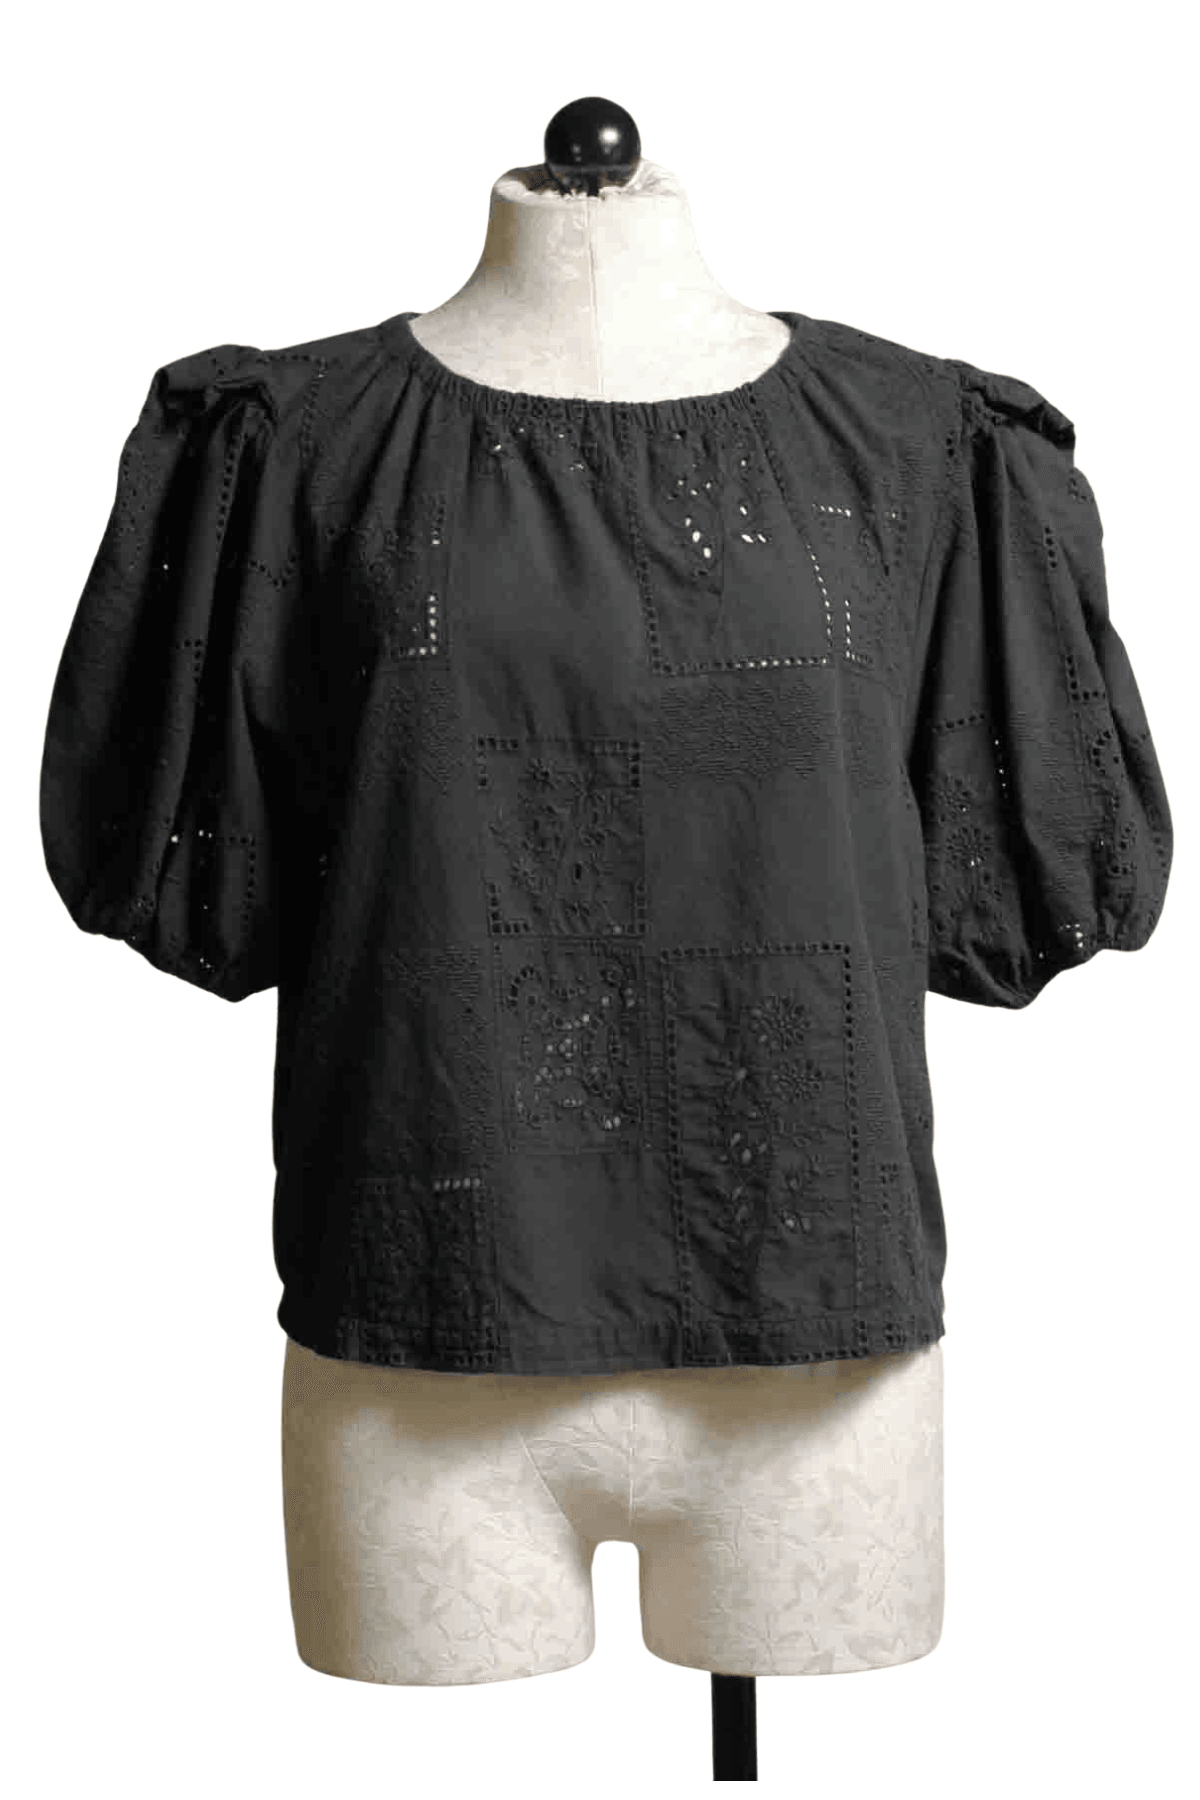 Cotton Eyelet Embroidered Patchwork Carbon Blouse in Black by R.G. Kane with Puff Sleeves